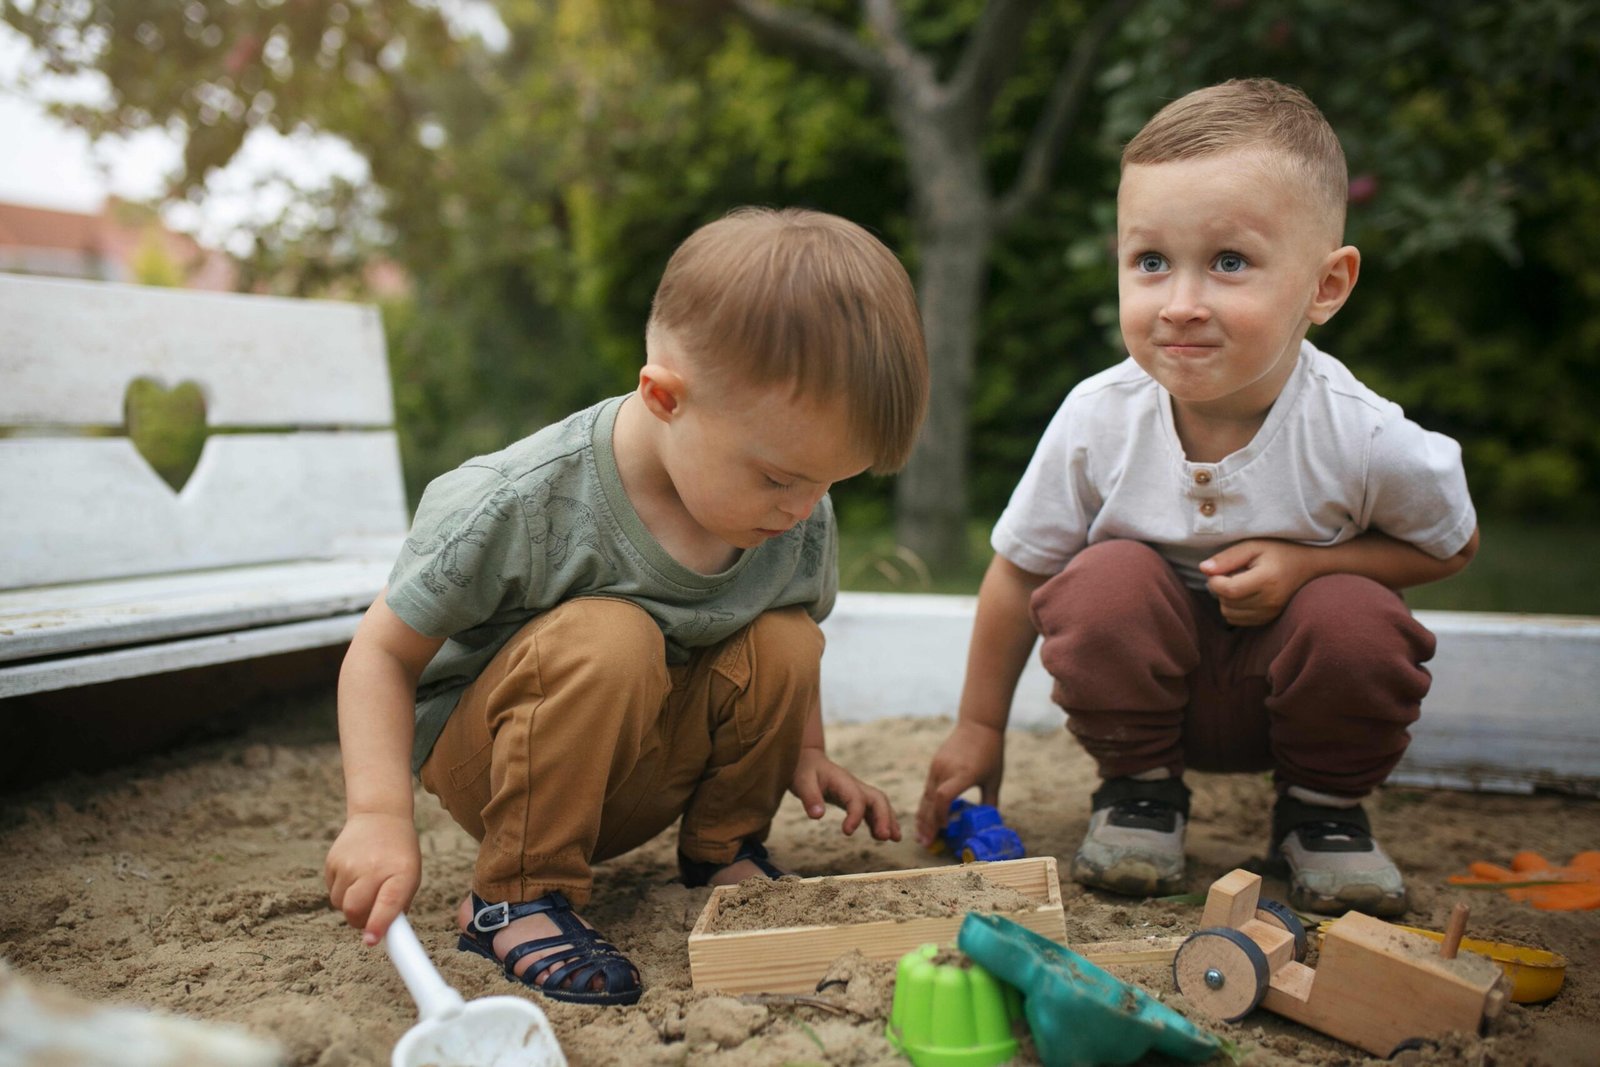 How to Choose the Right Construction Activities for Preschoolers